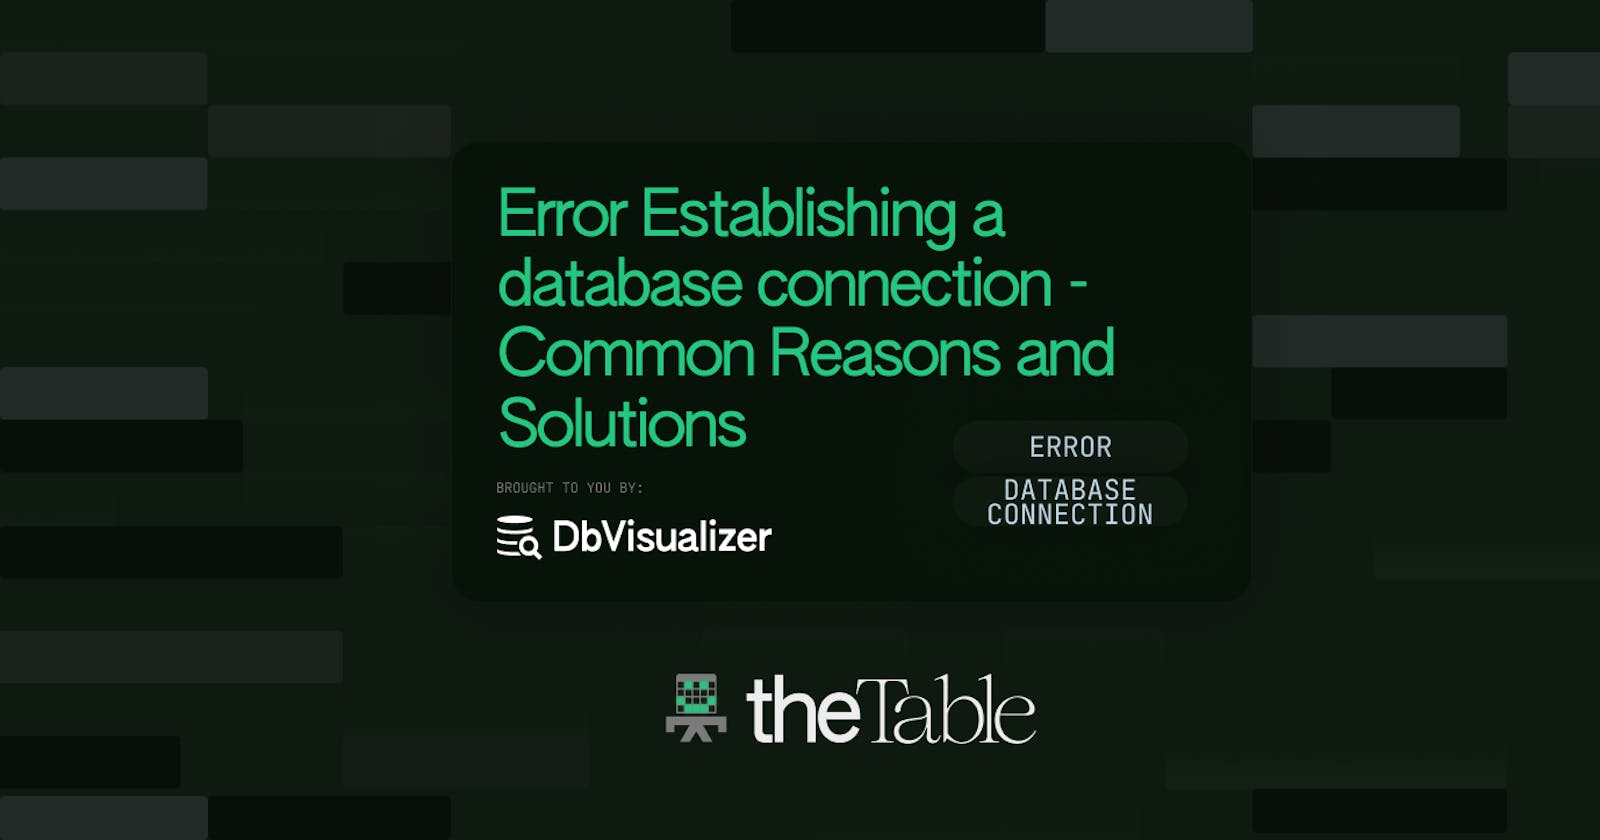 ERROR
Error Establishing a database connection - Common Reasons and Solutions